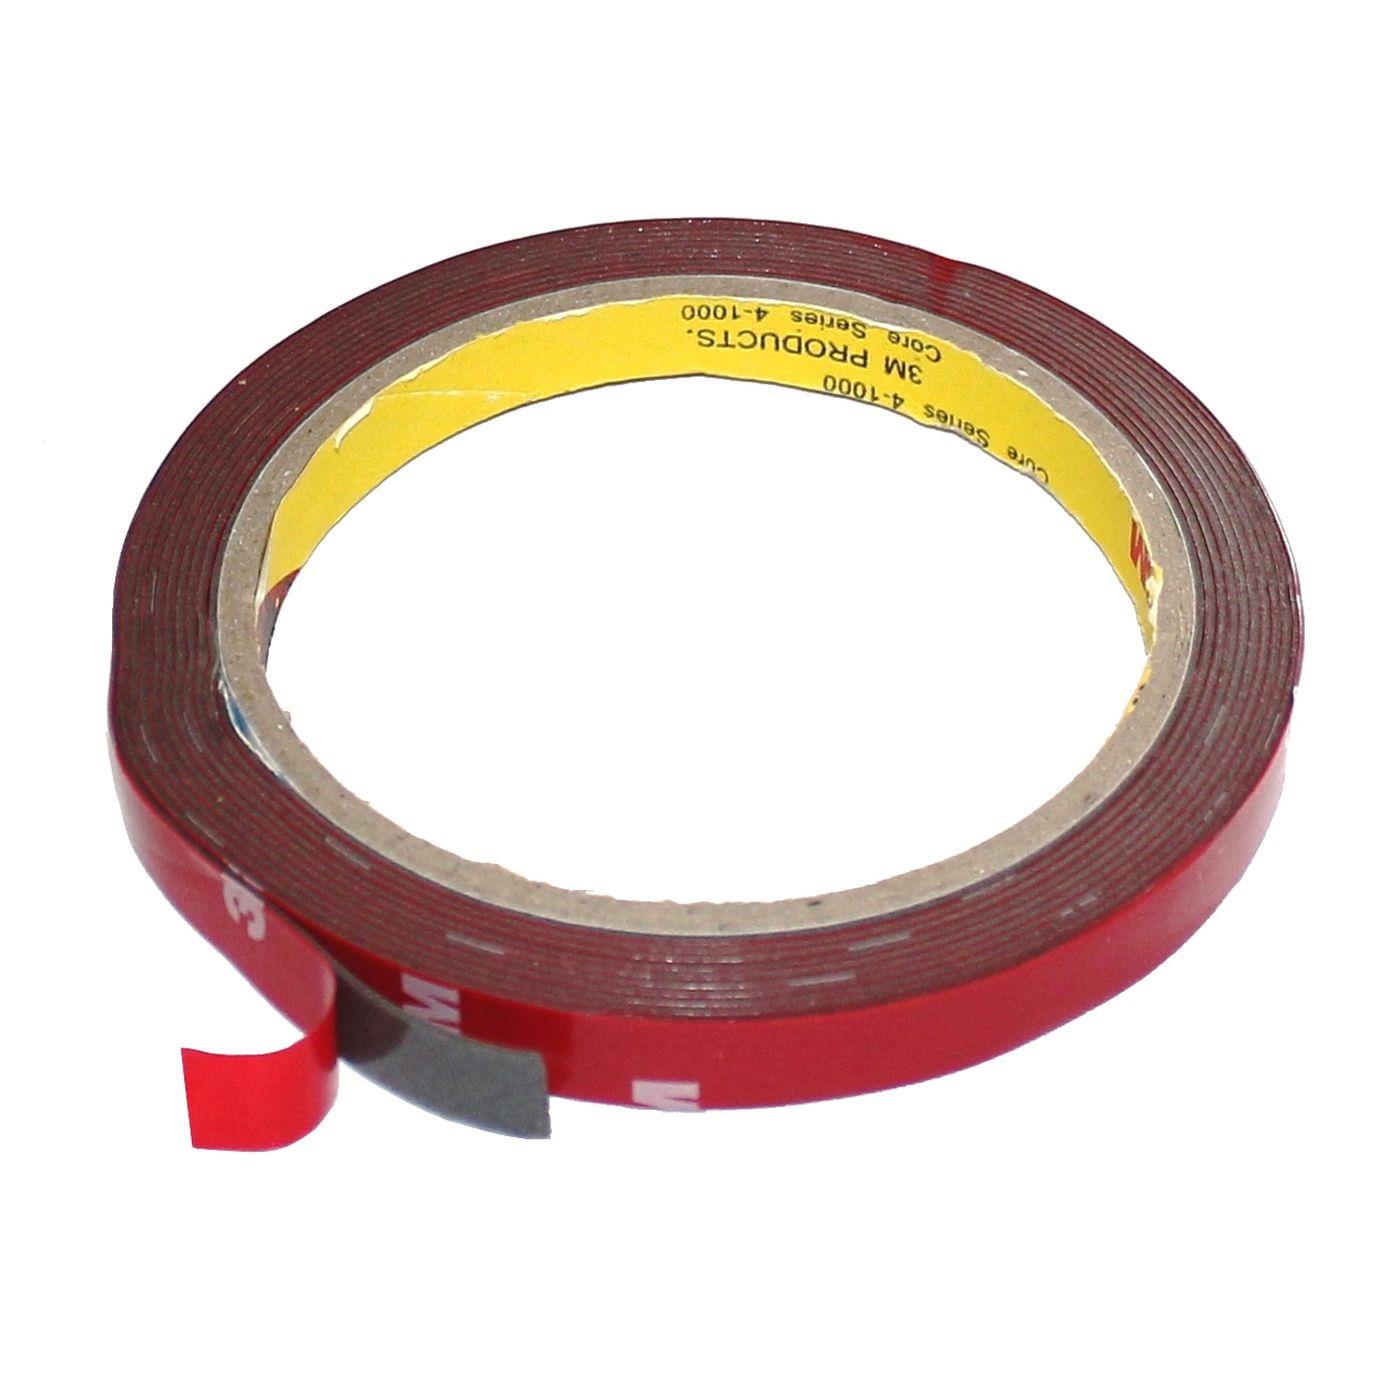 3m Double sided adhesive tape 3M 4229P 10mm Foam Adhesive Tape Car strong